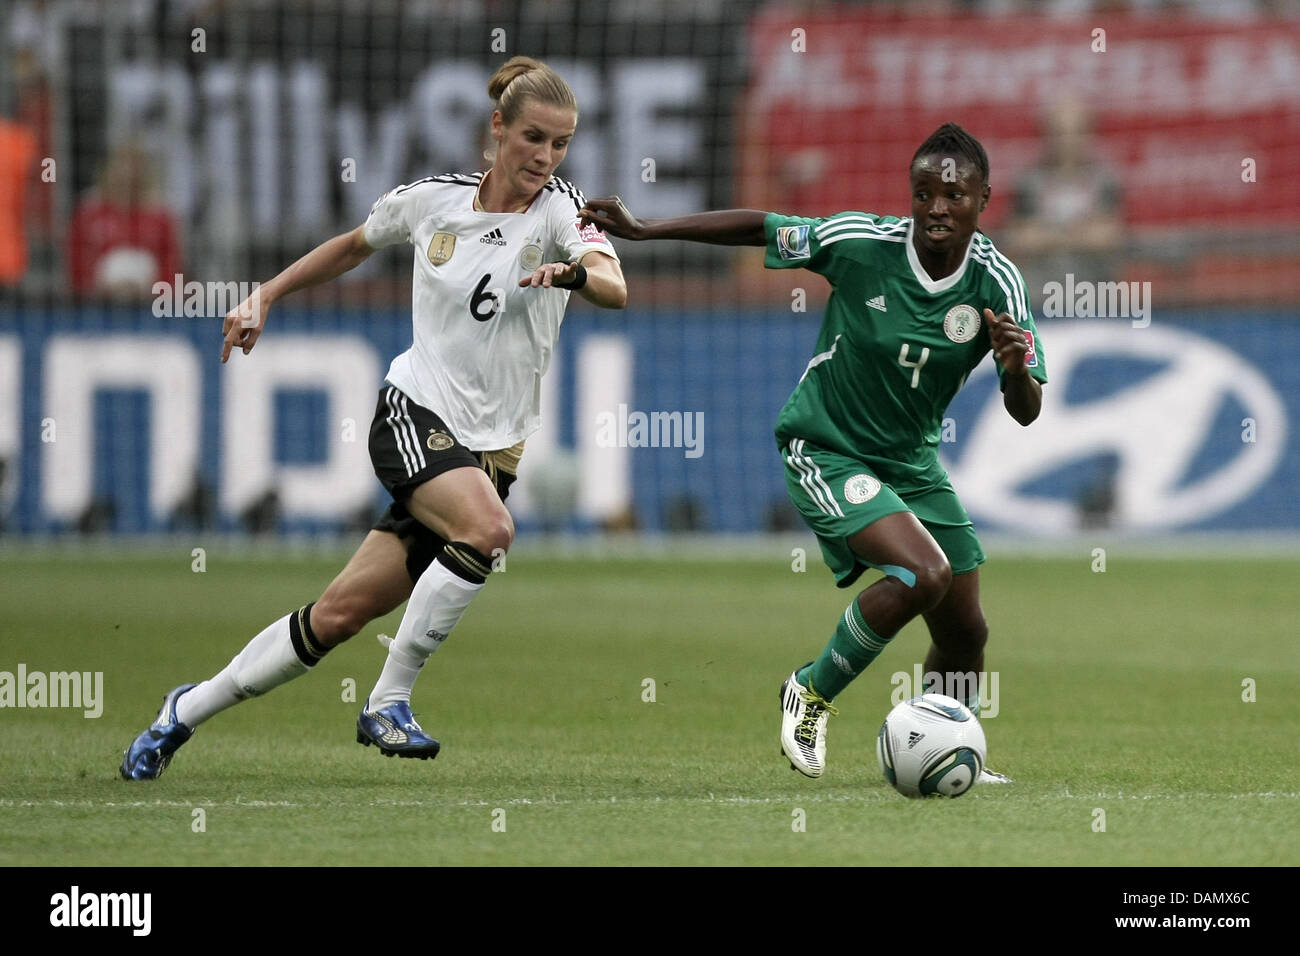 Simone Laudehr (l) of Germany and Perpetua Nkwocha of Nigeria fight for the ball during the Group A match Germany against Nigeria of FIFA Women's World Cup soccer tournament at the FIFA Women's World Cup Stadium in Frankfurt, Germany, 30 June 2011. Foto: Fredrik von Erichsen dpa/lhe Stock Photo